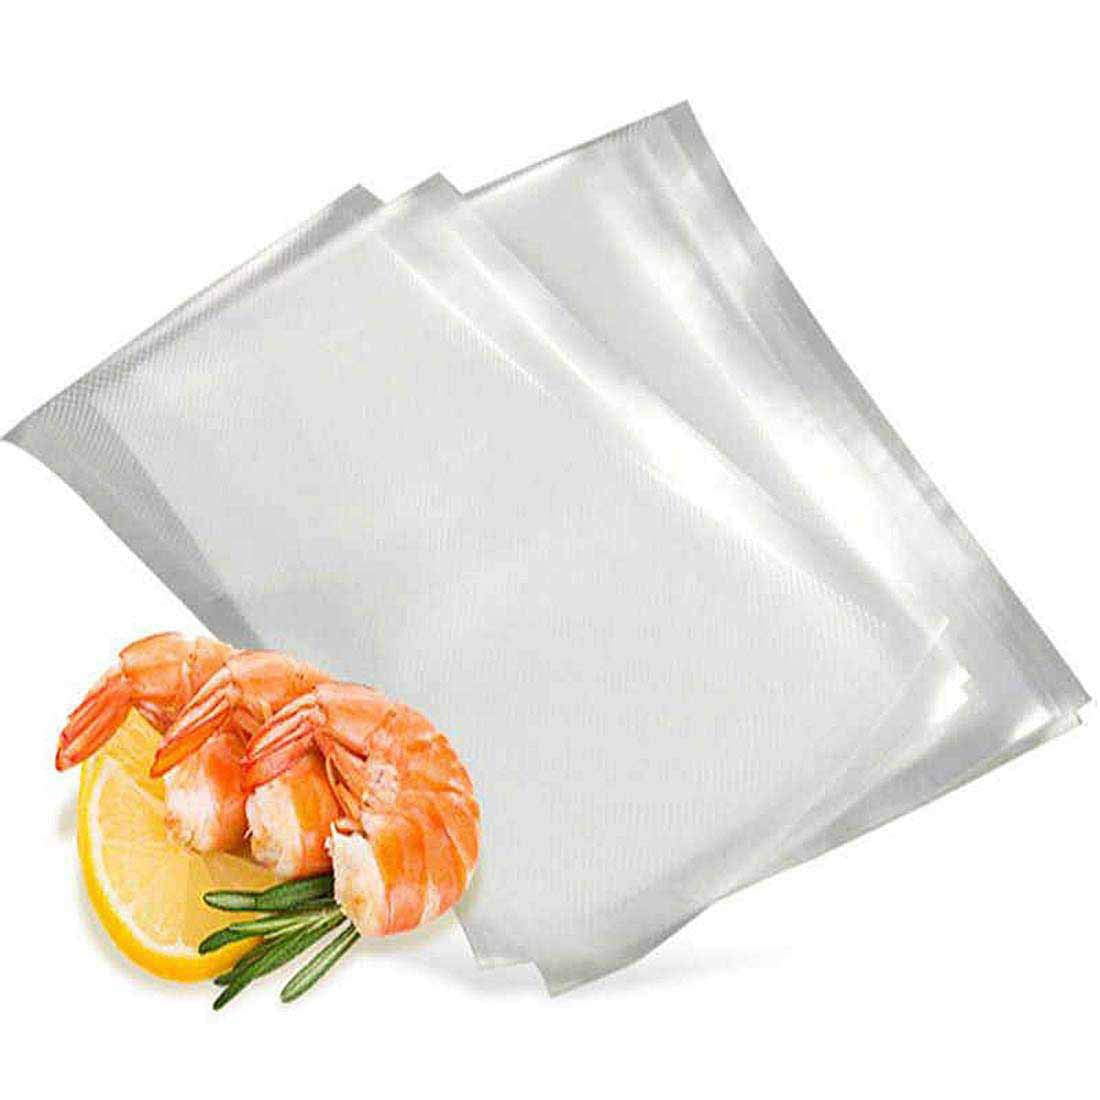 FERENLI 100 Pieces Vacuum Sealer Bags for Food Storage Open Top Clear  Plastic Flat Pouches Bulk Food Packaging Bags with Tear Notch 2.7x3.9 inch